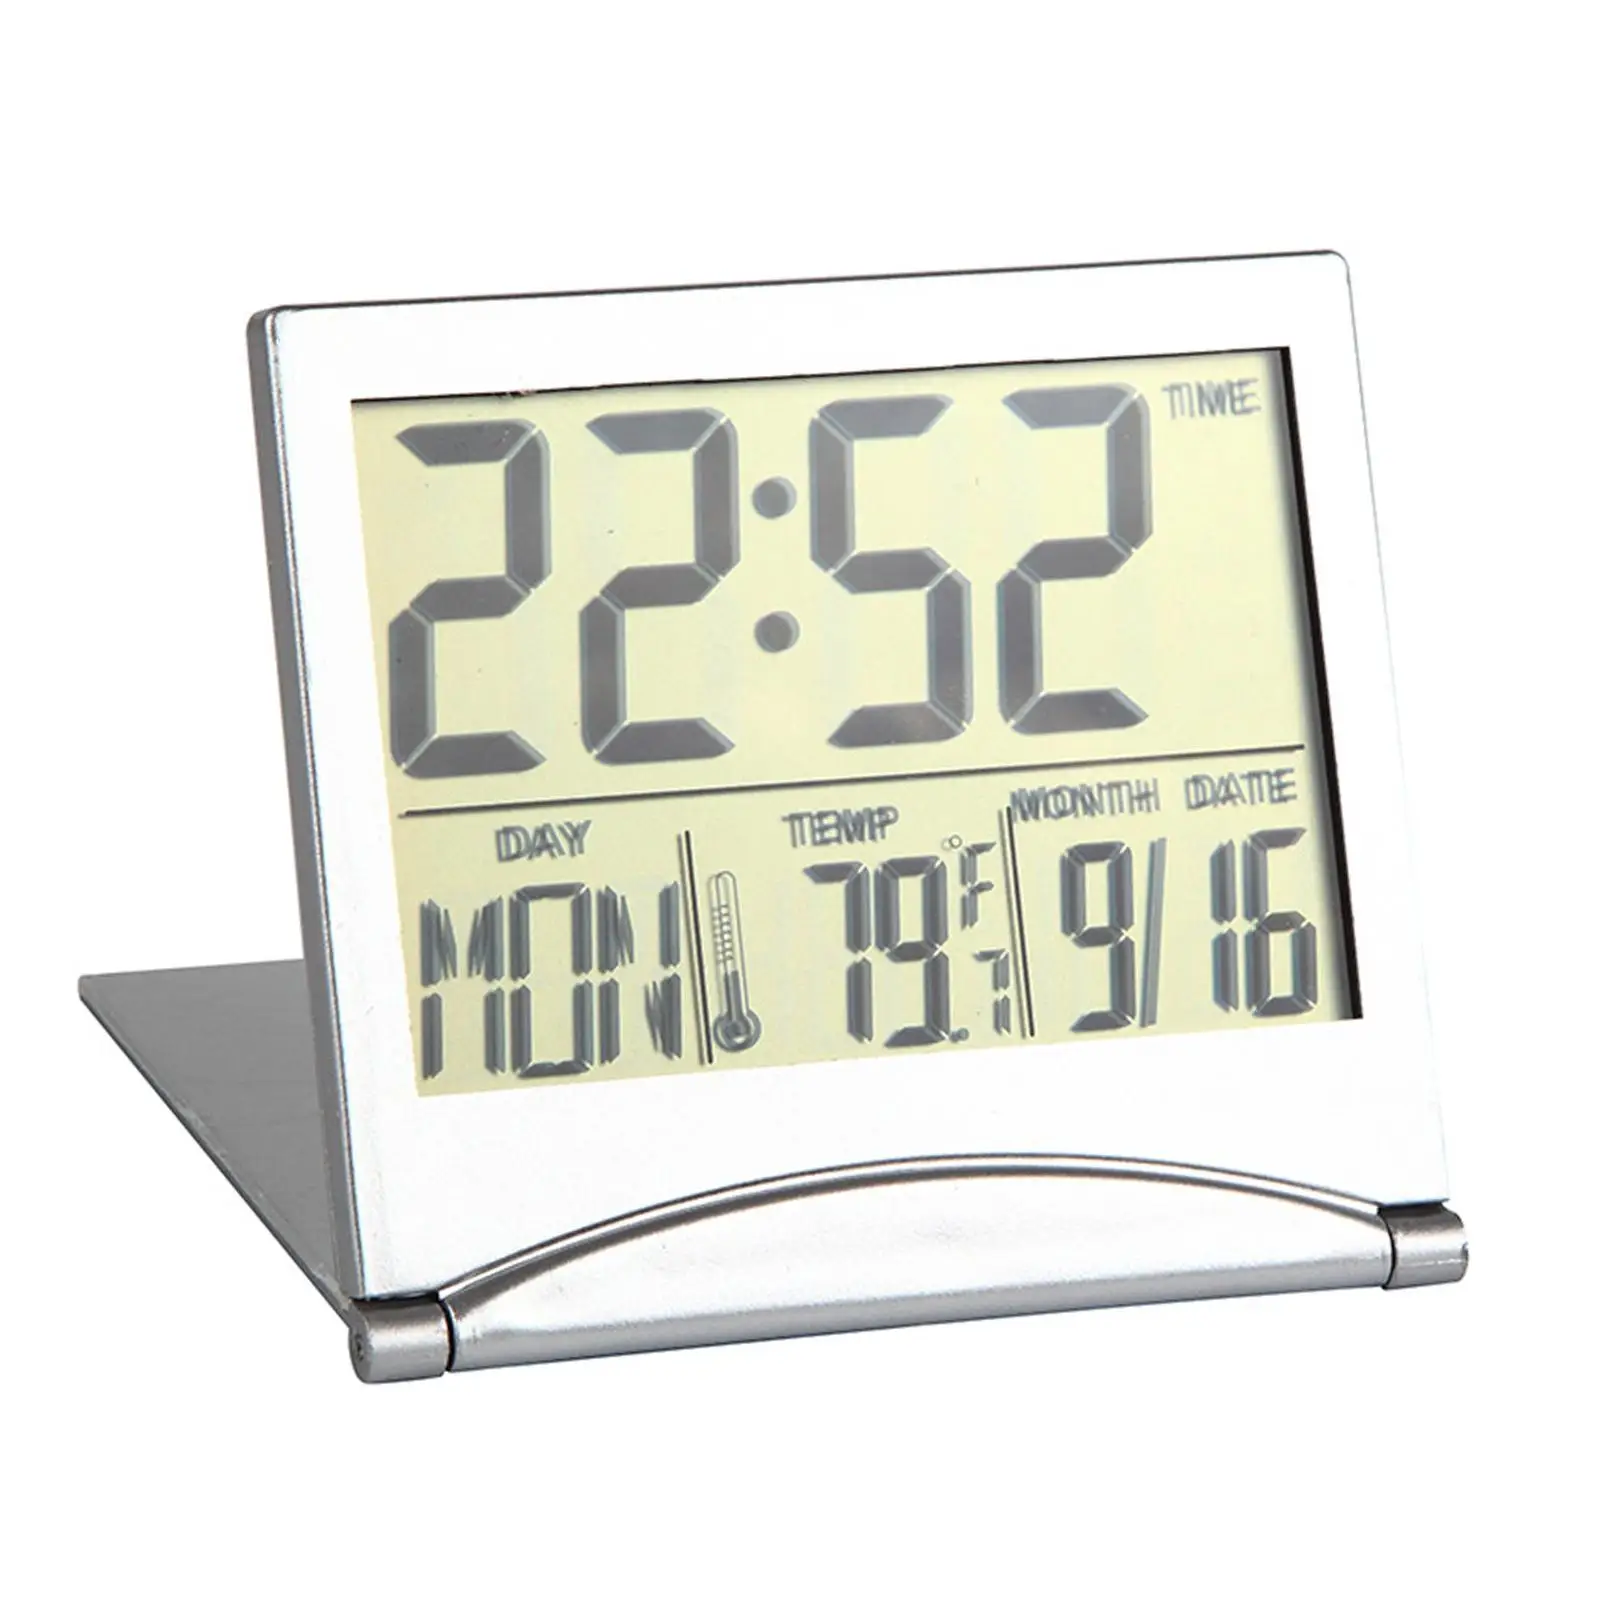 LCD Display Digital Travel Alarm Clock Snooze Mode Calendar Reminders Battery Operated Foldable Compact Desk Clock for Training